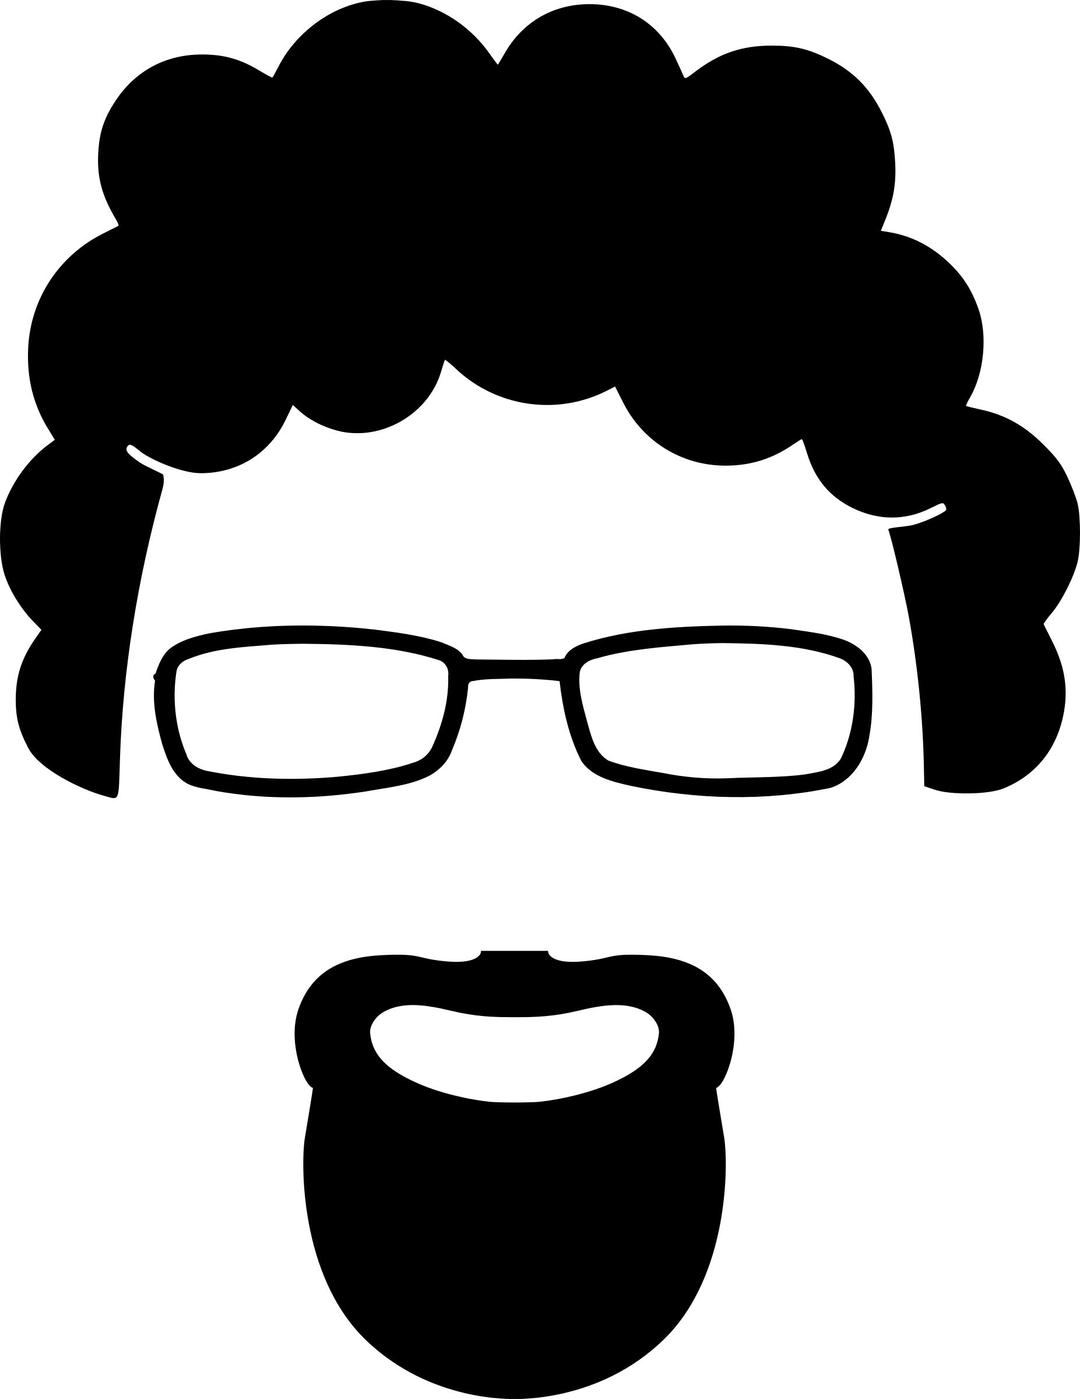 Goatee silhouette png transparent